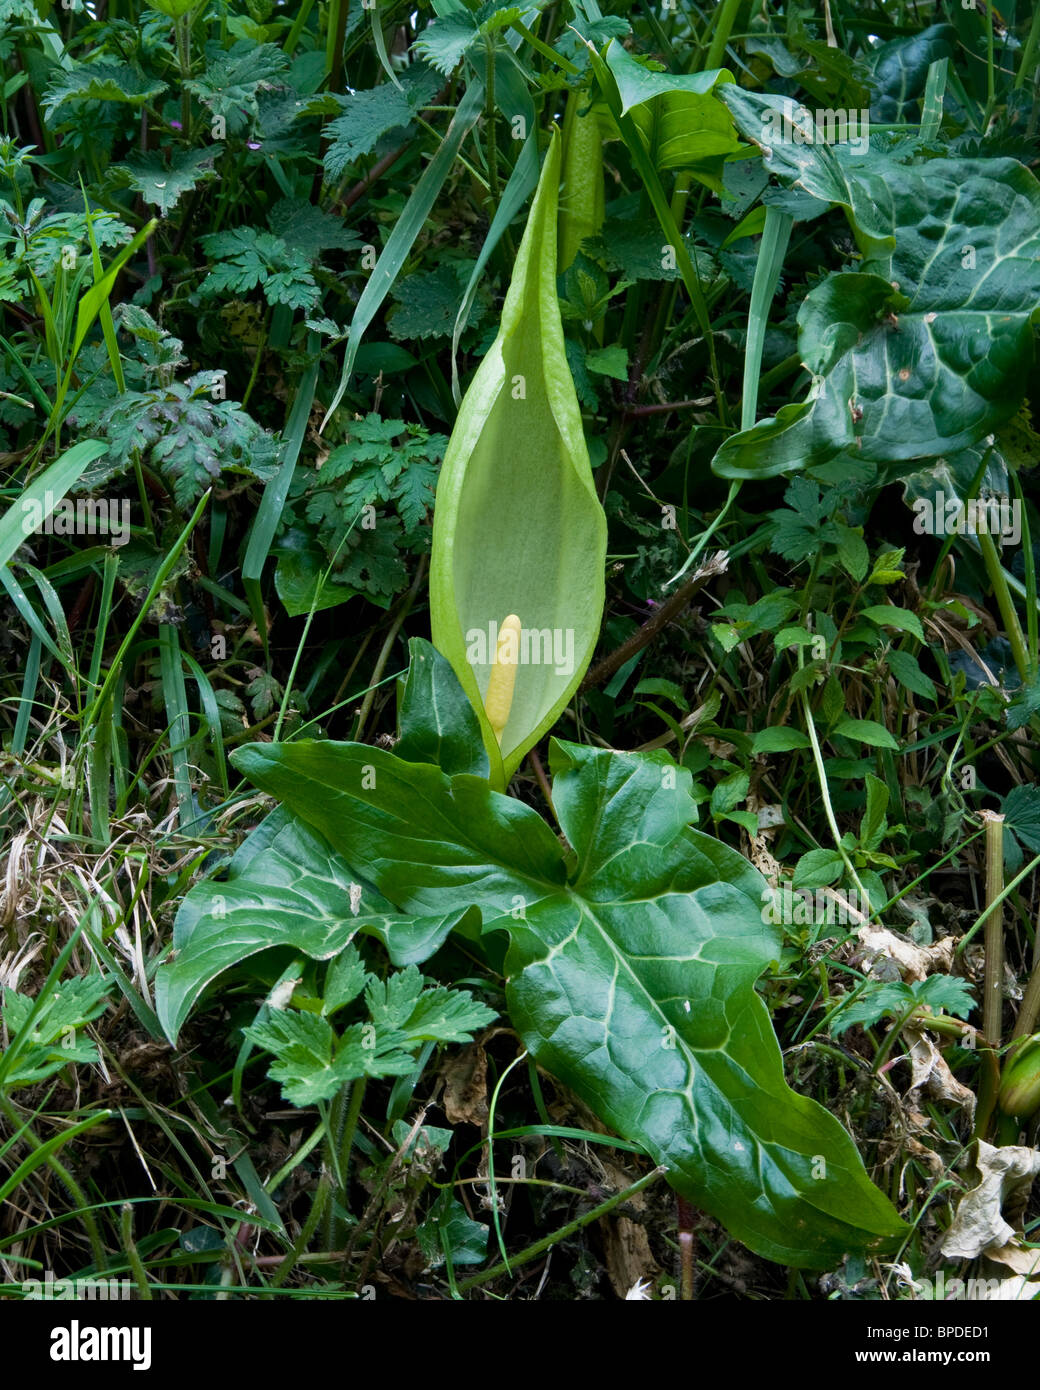 An Arum lily flowering amongst a hedgerow Stock Photo